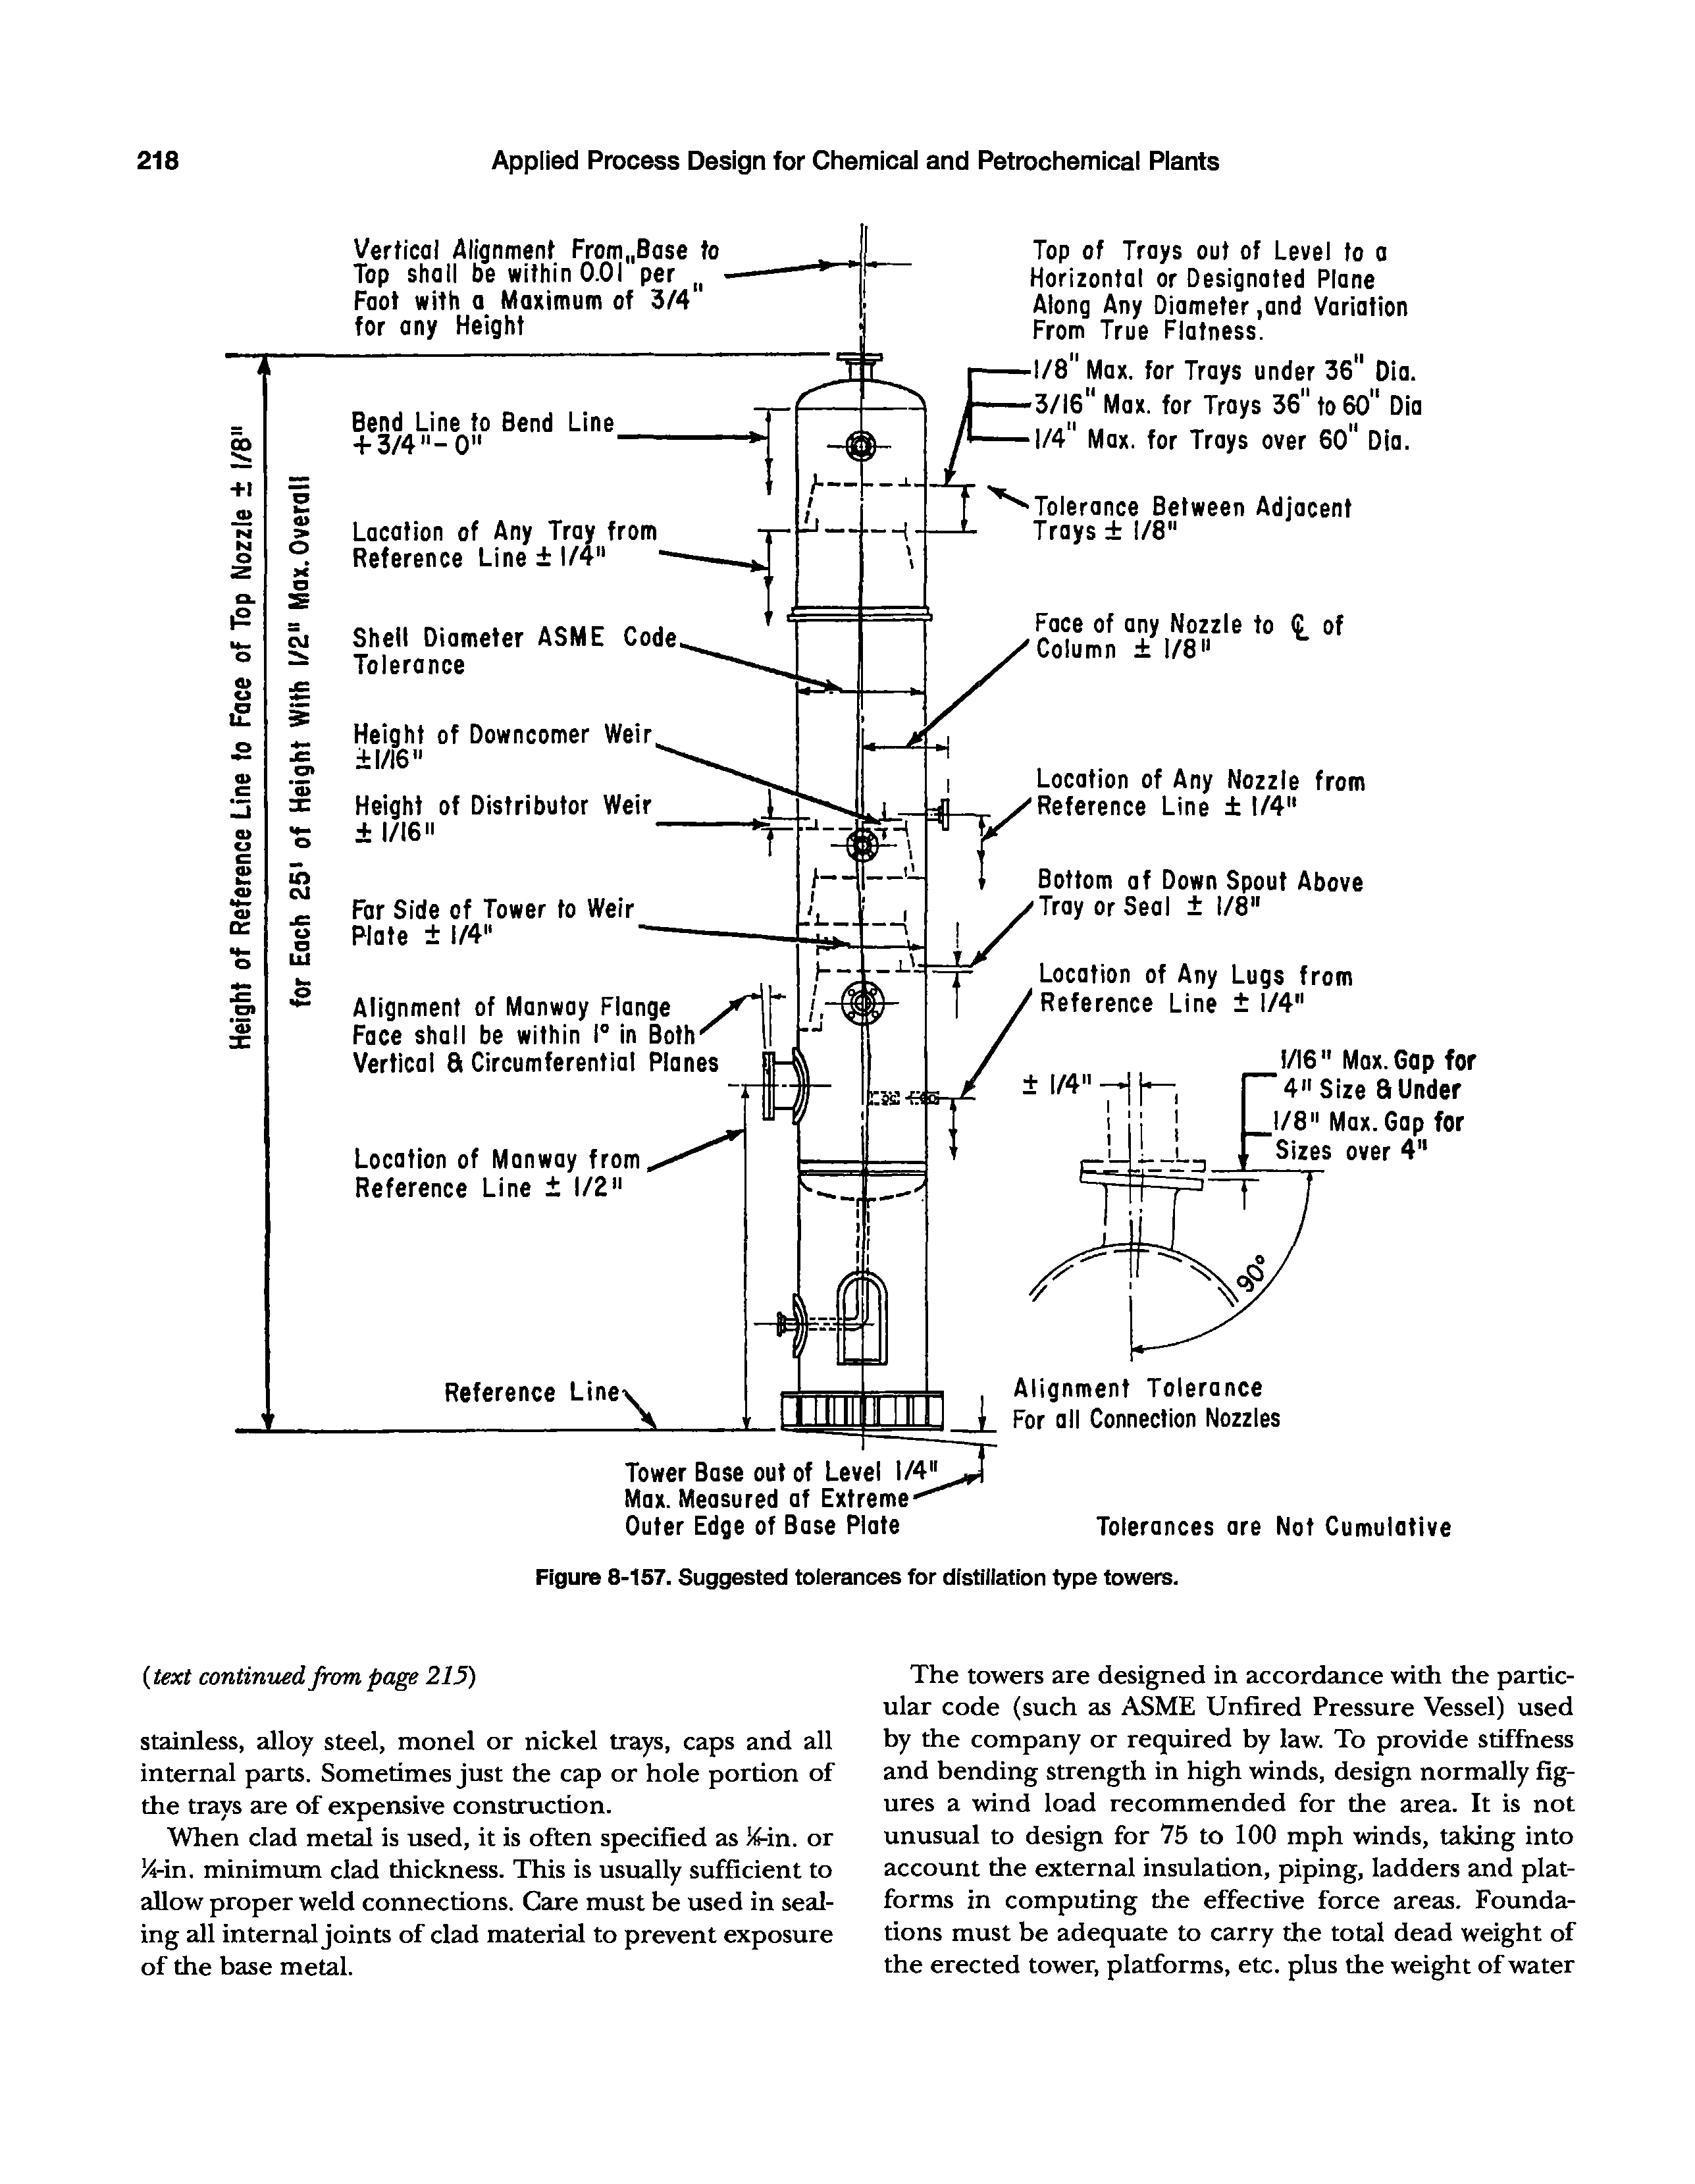 Figure 8-157. Suggested tolerances for distillation type towers.